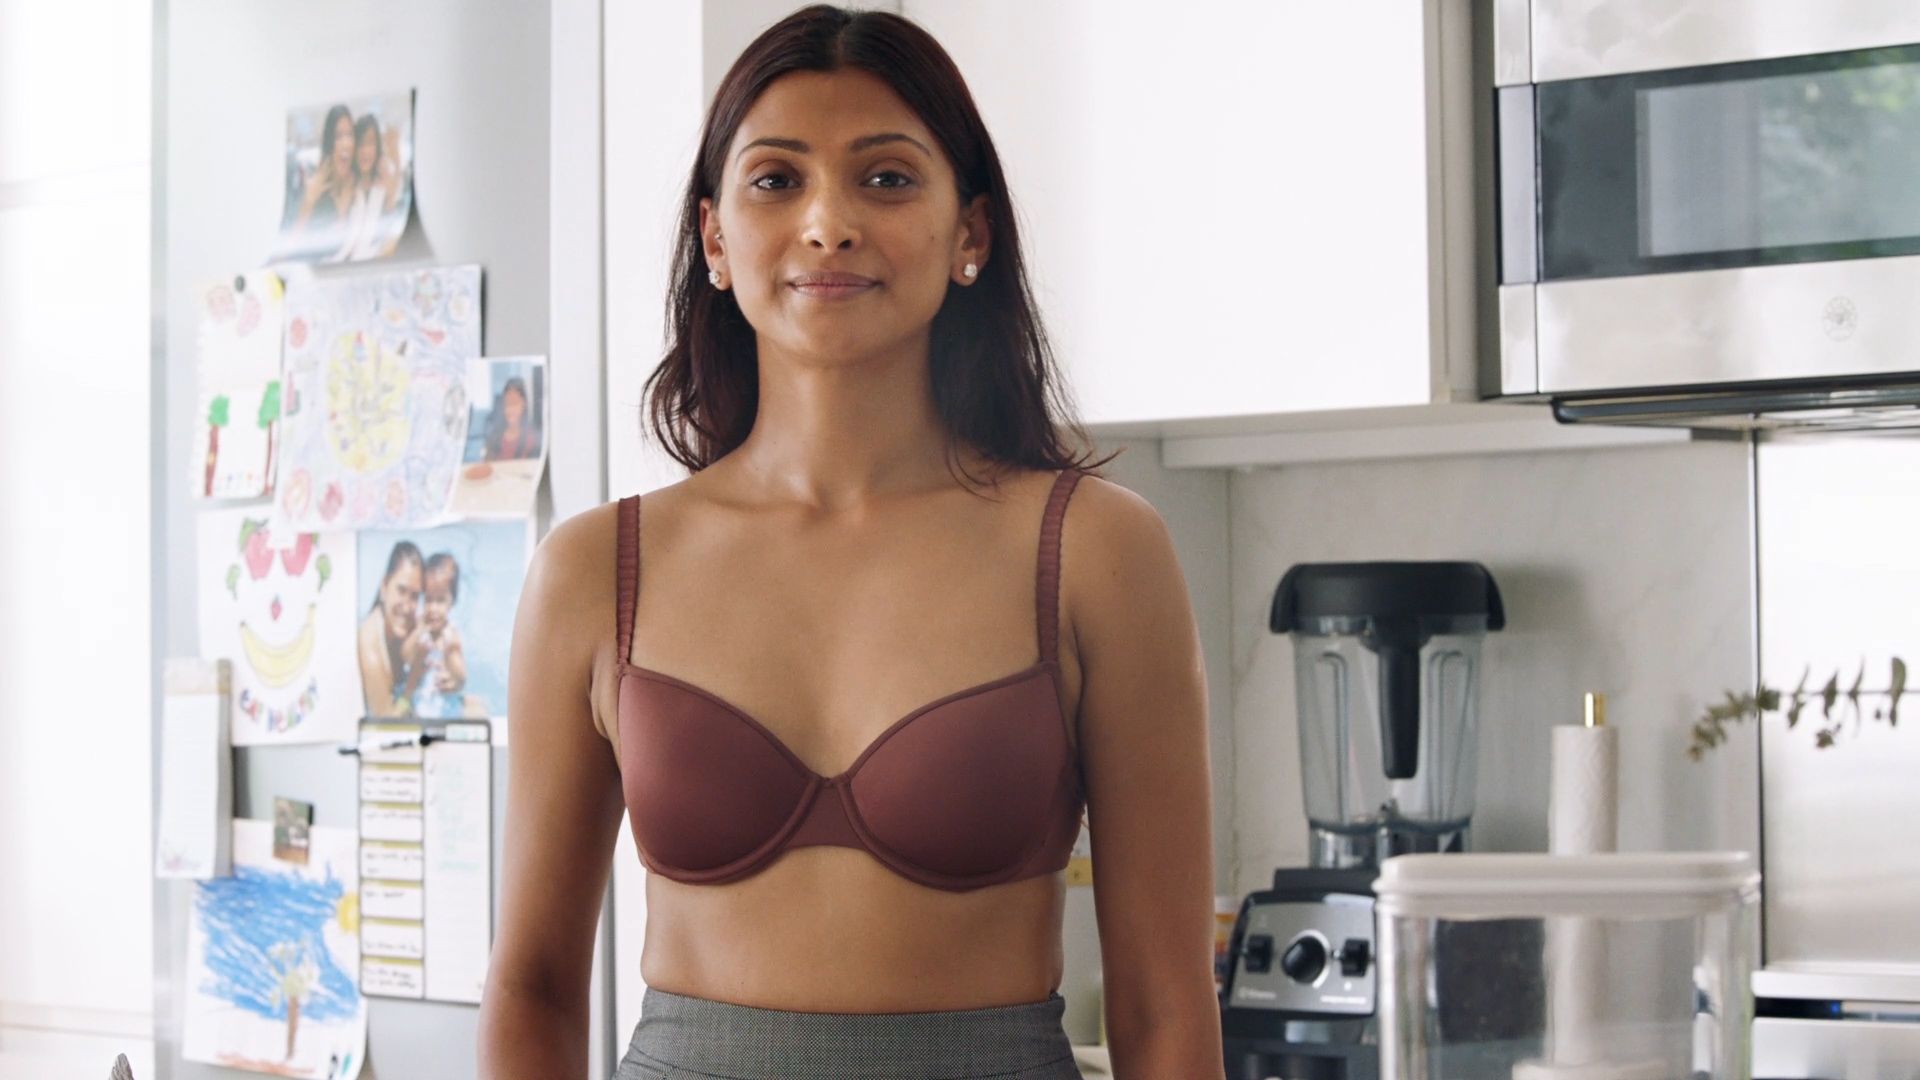 This model couldn't find a bra she liked — so she invented one